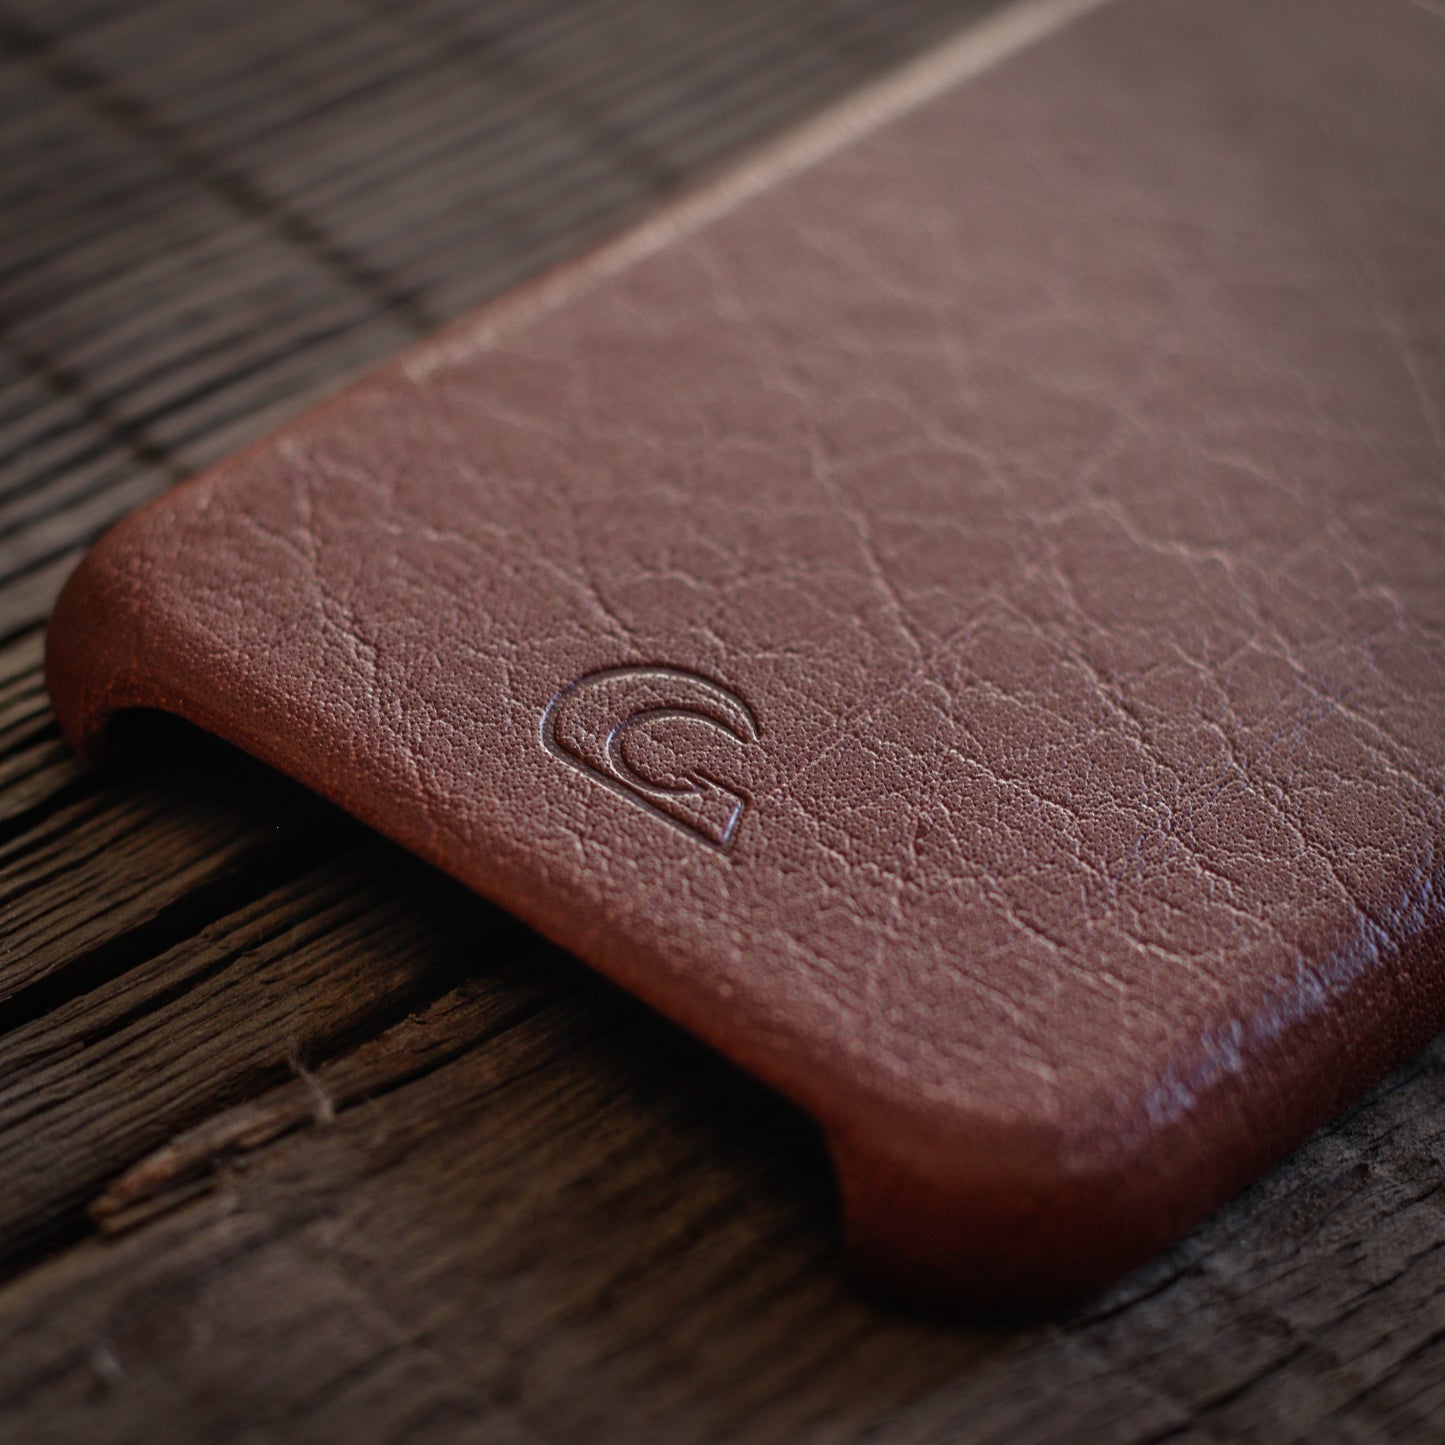 iPhone 11 Pro Leather Case - Brown